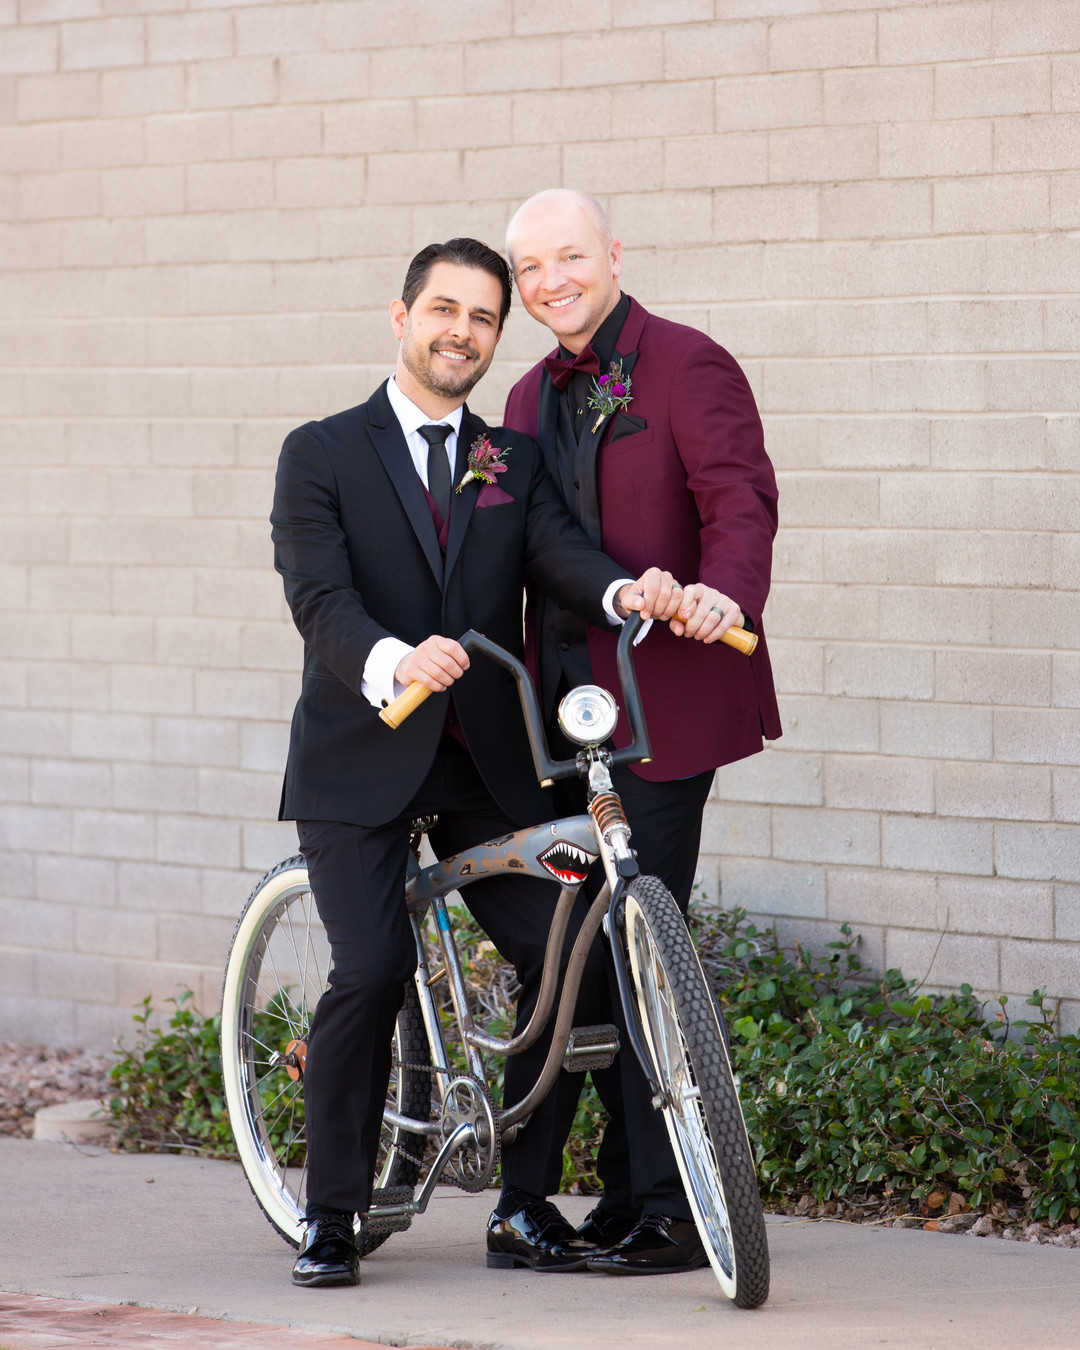 Styled Black & Burgundy Wedding at Warehouse 215 @ Bentley Projects